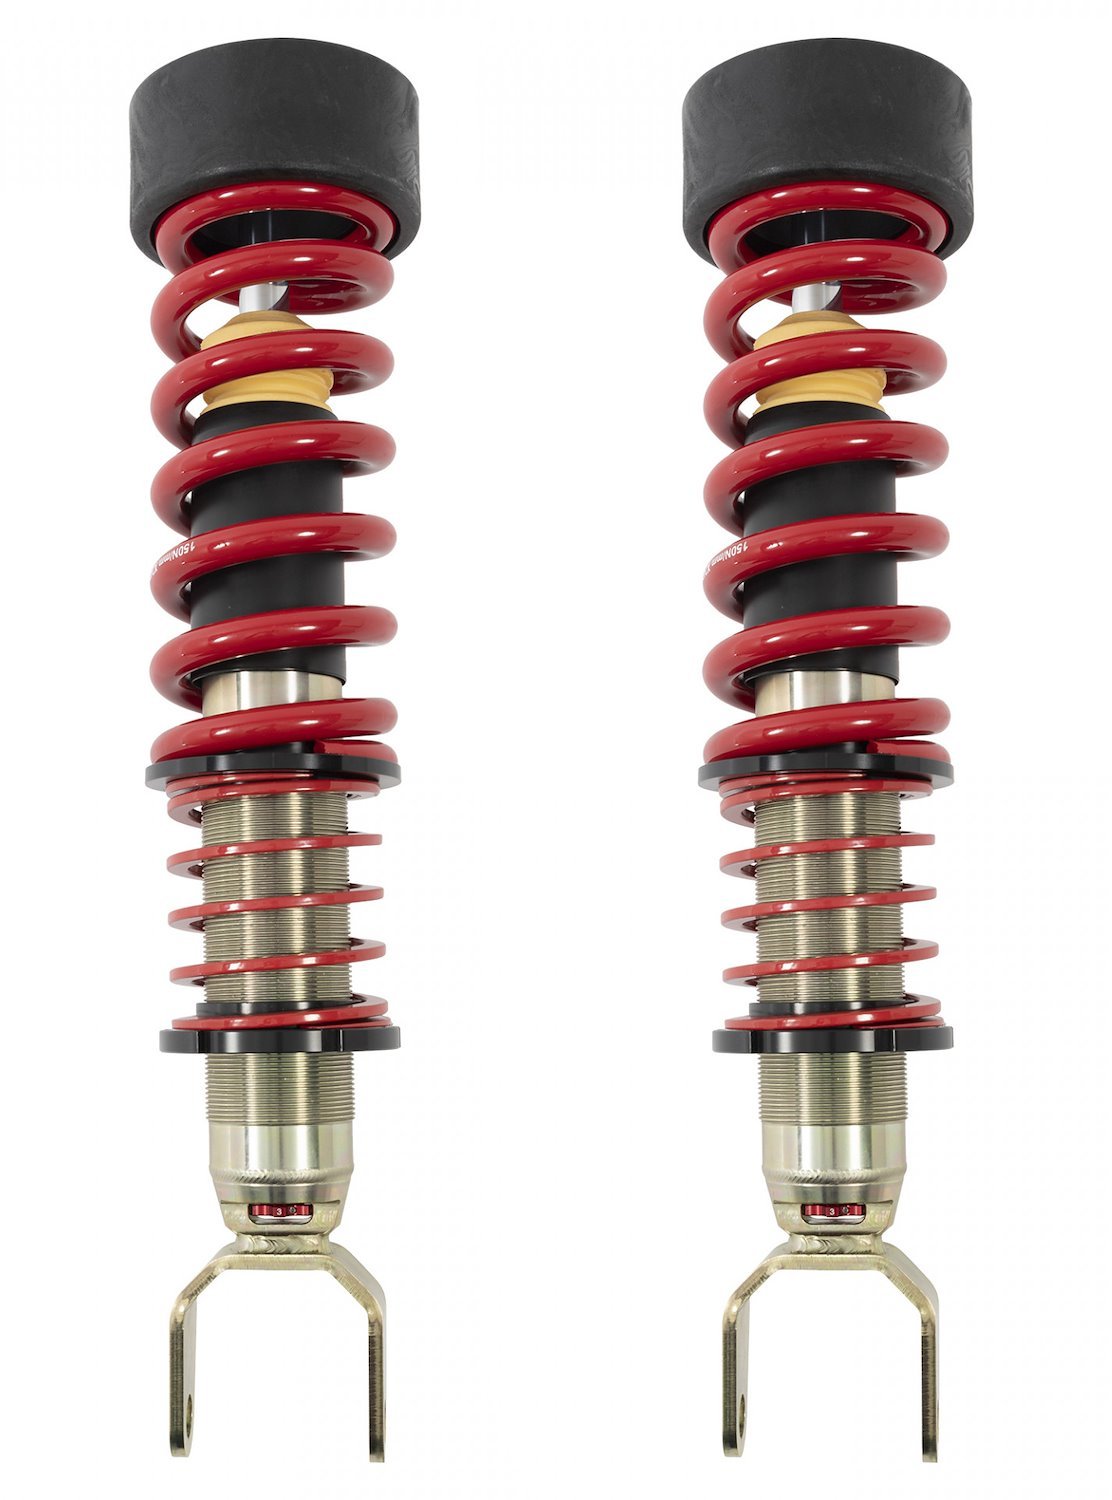 Street Performance Front Coilover Lowering Kit fits Select Late-Model Ram 1500 2WD/4WD Pickup Trucks